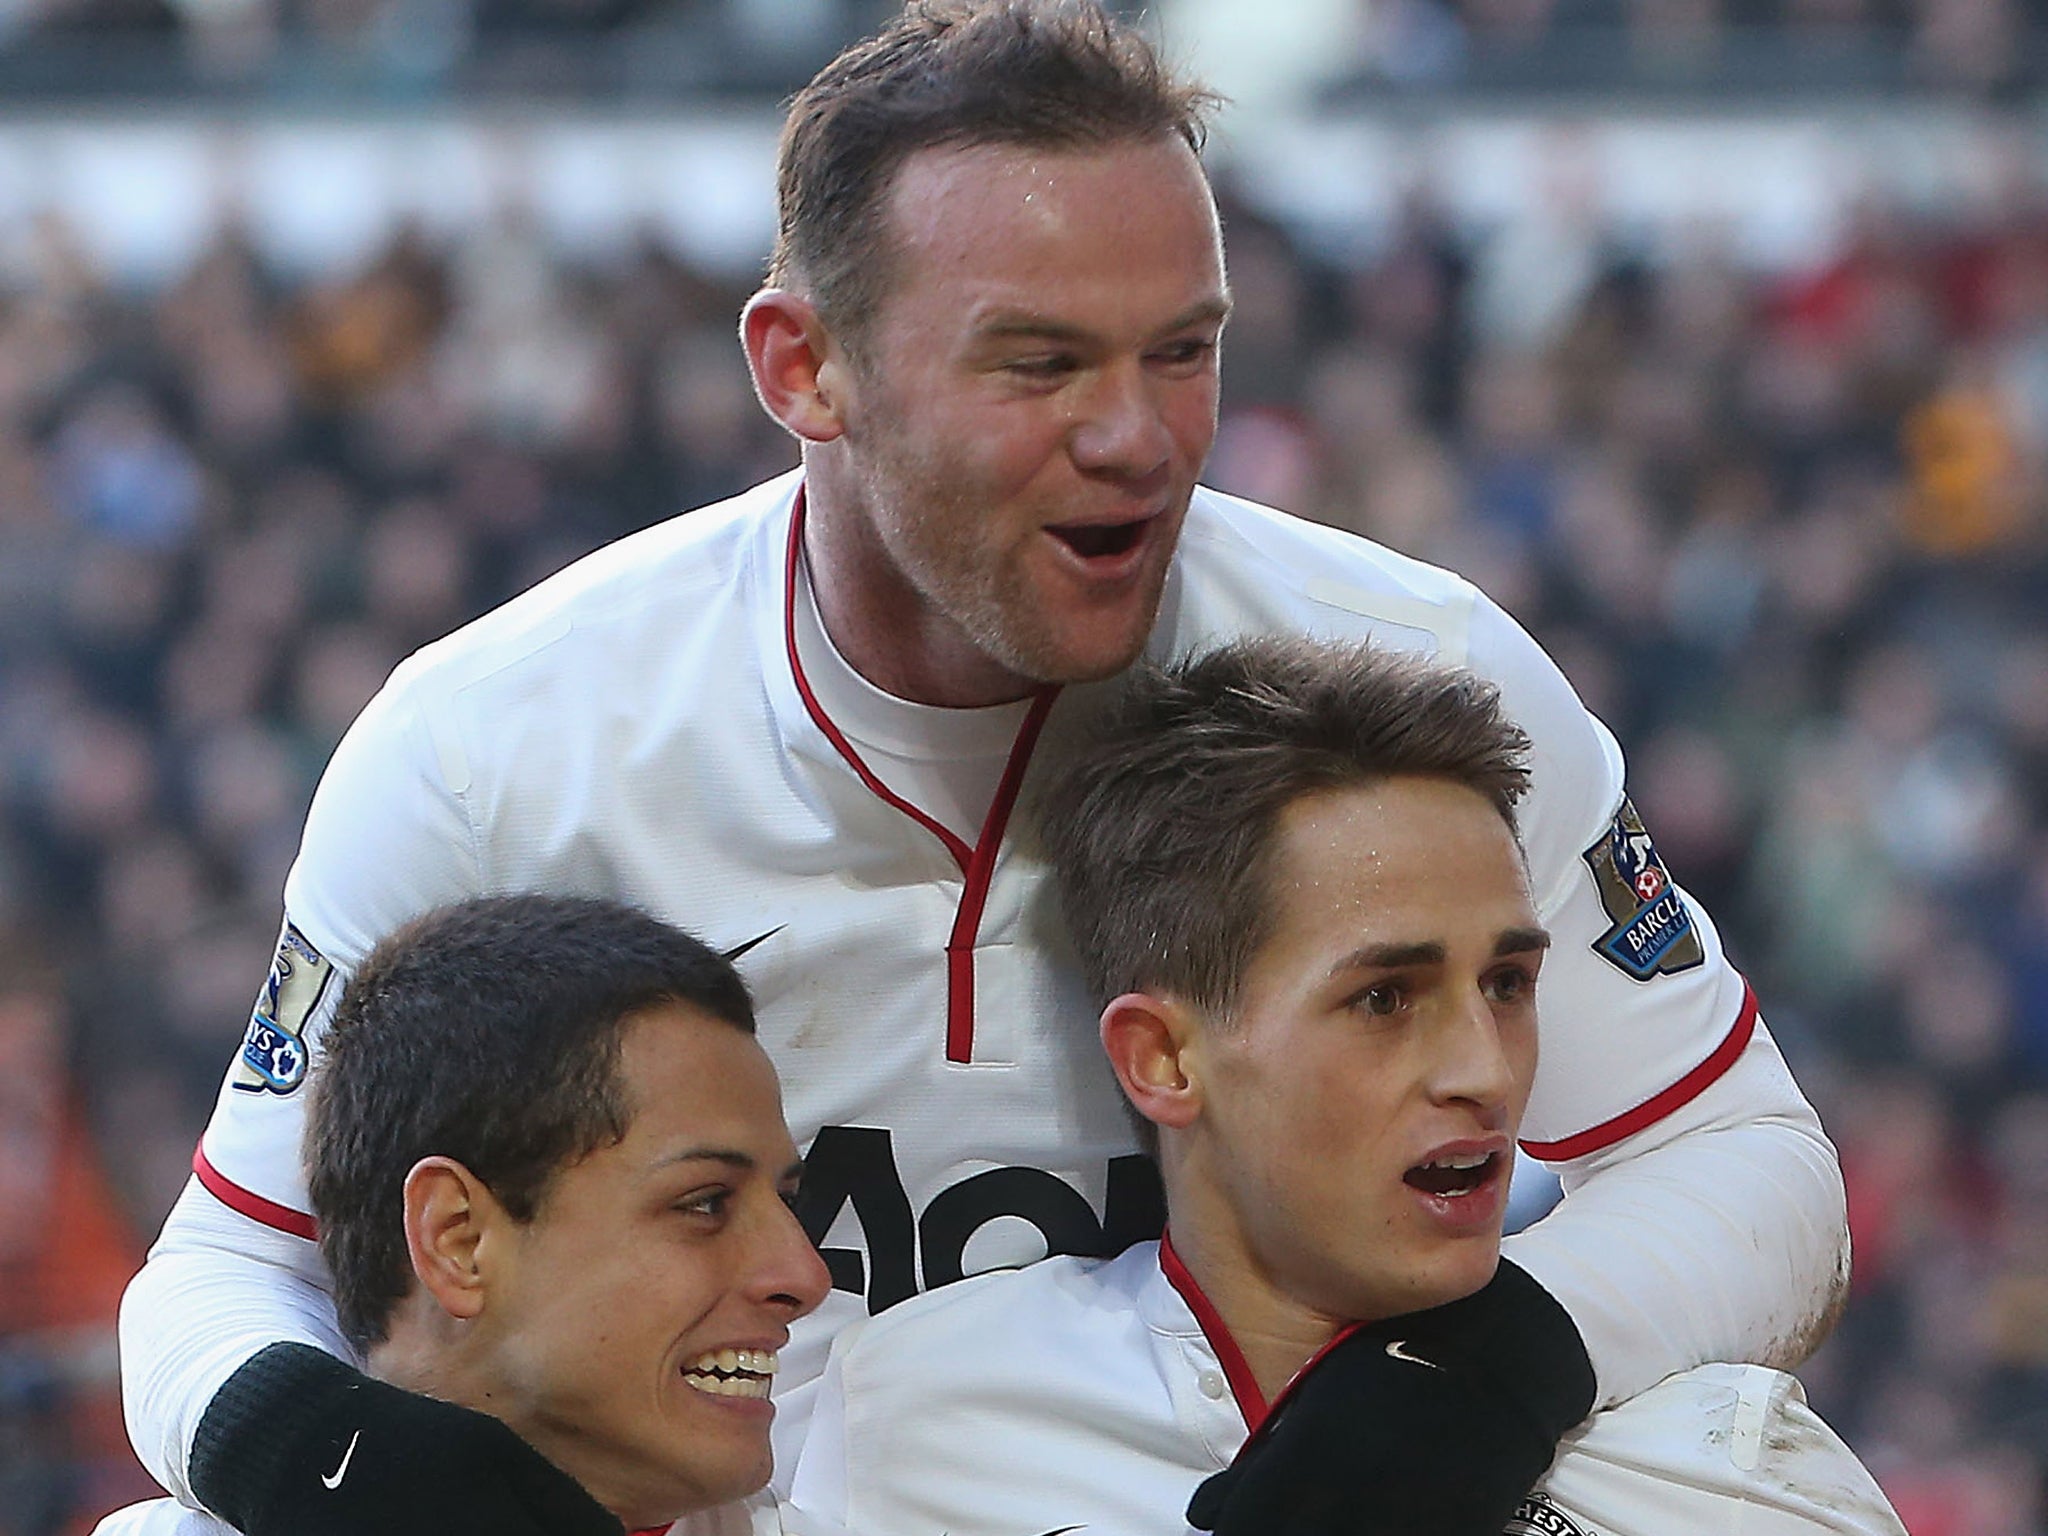 Wayne Rooney and Adnan Januzaj have been tipped to shine at the World Cup by Ryan Giggs